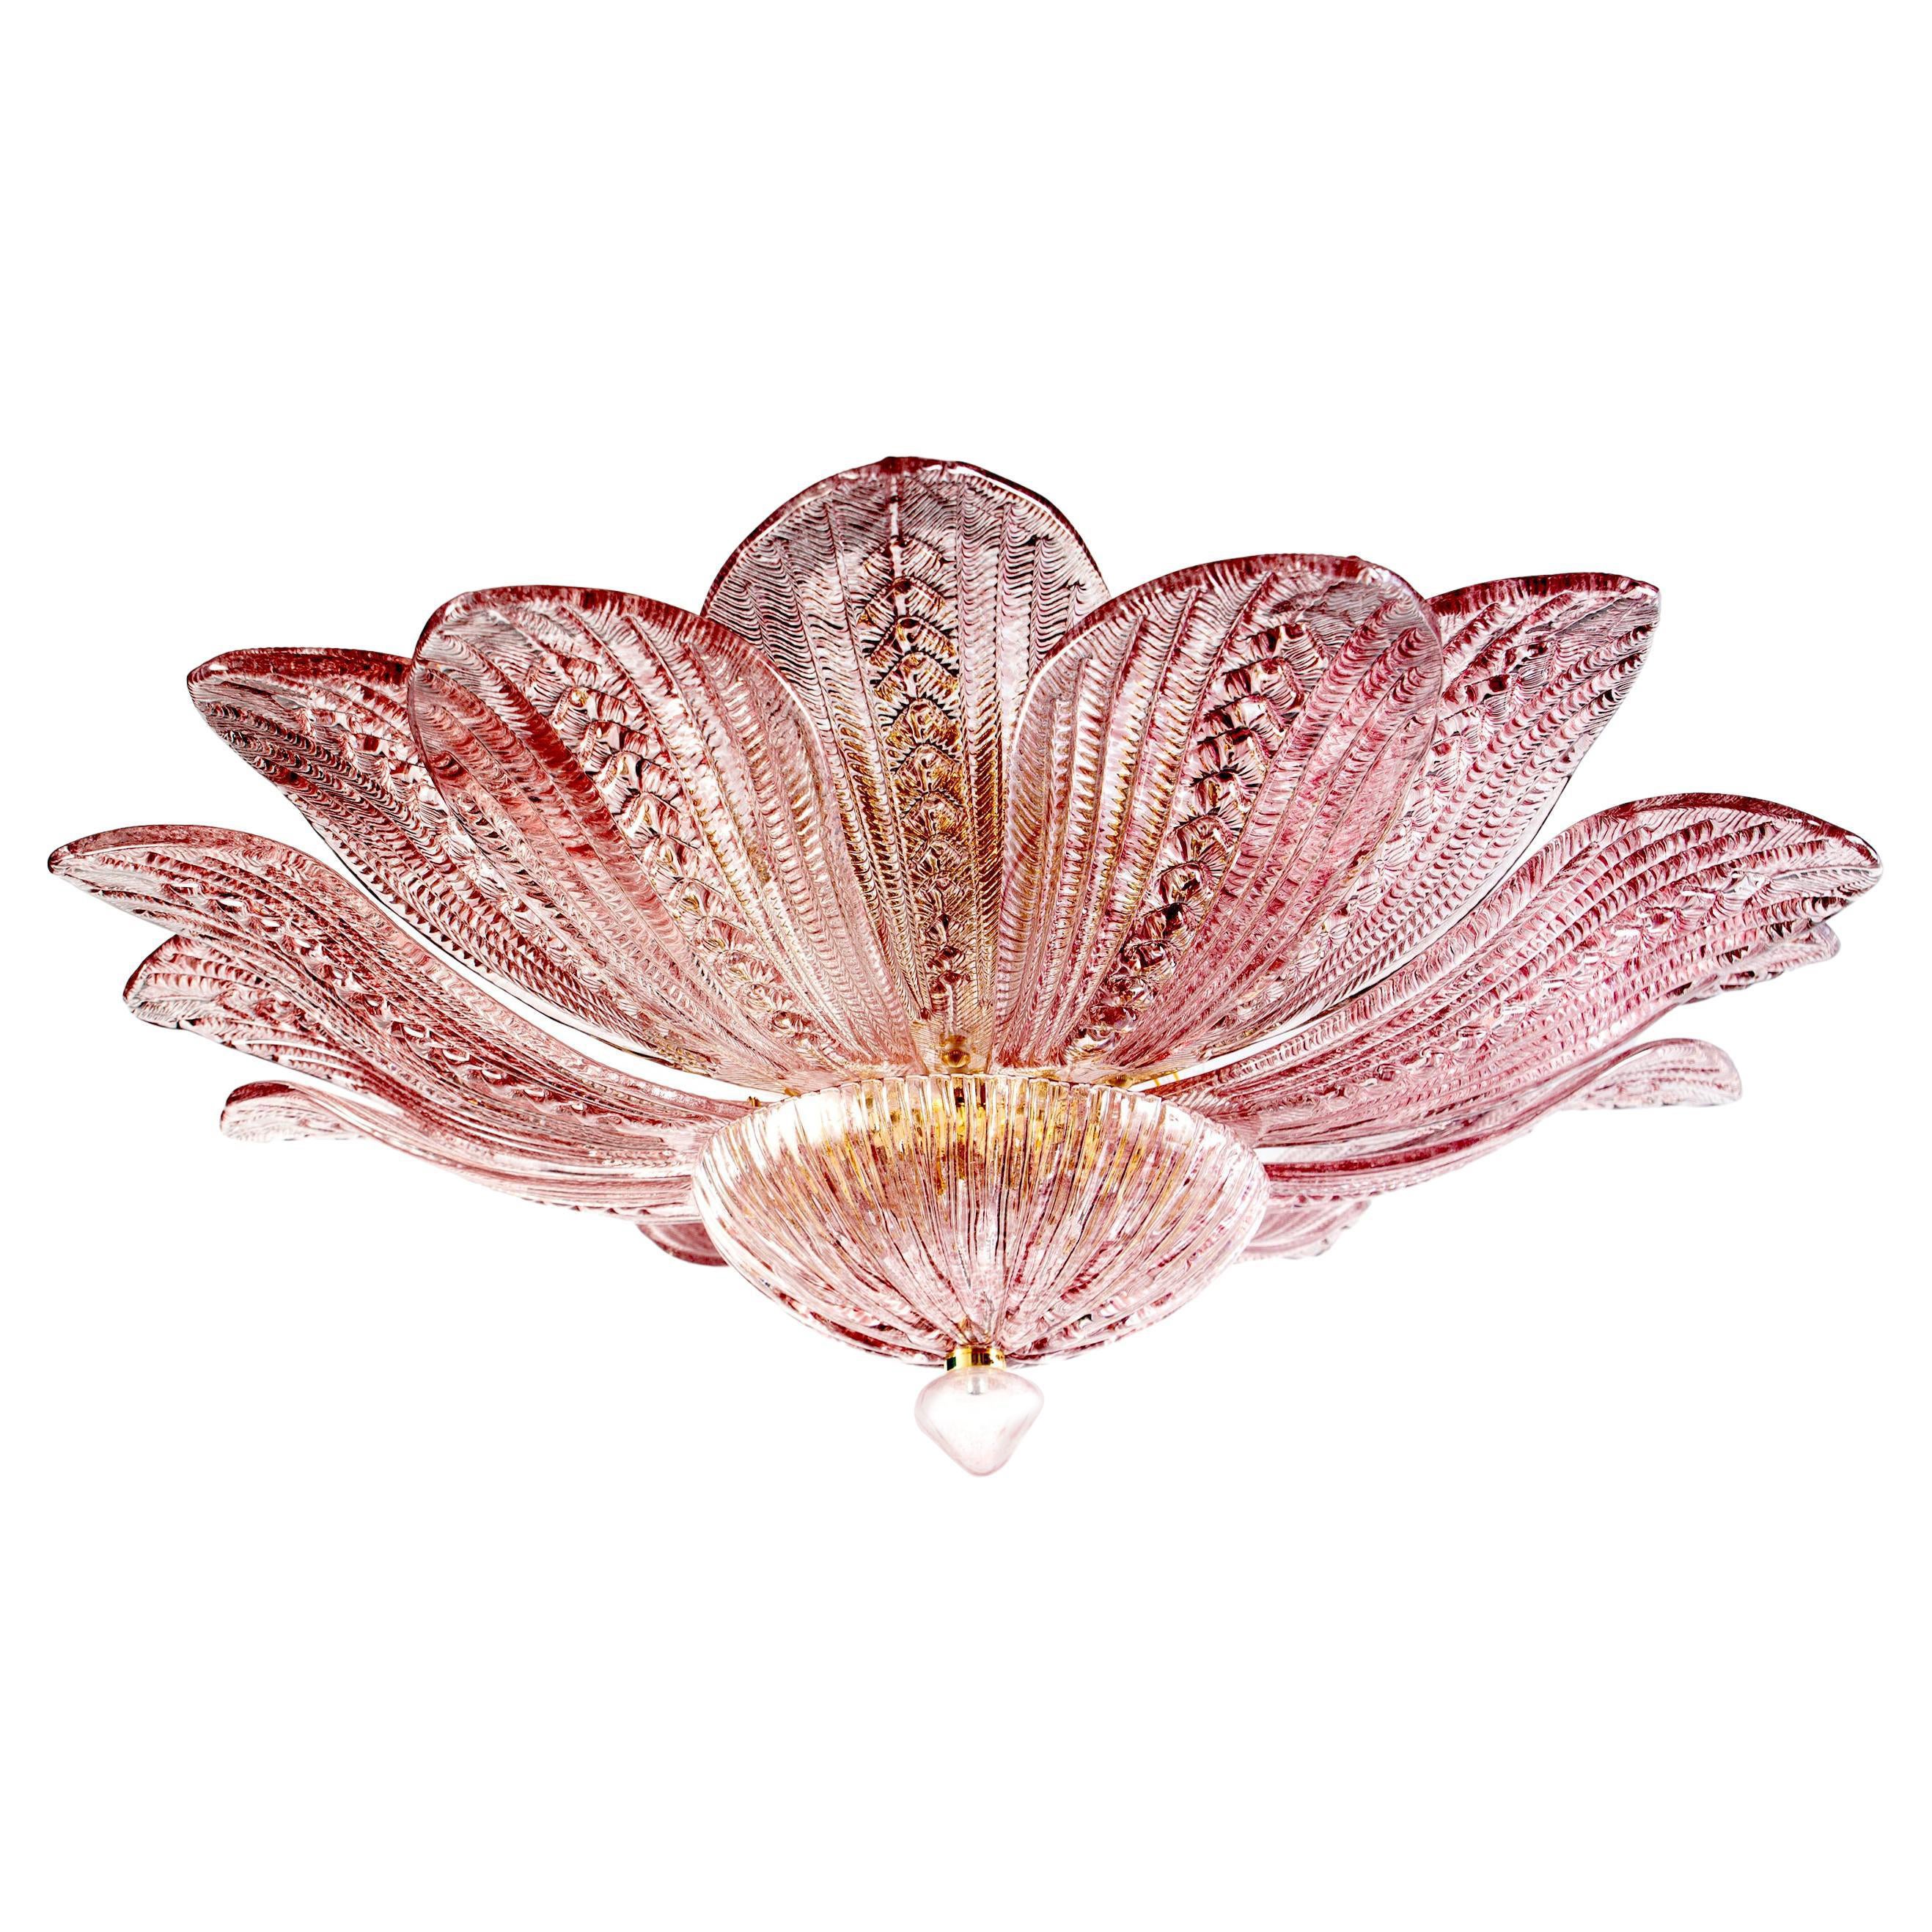 Realized in pure pink amethyst color Murano glass consists of 16 delicious hand blown leaves.
 The structure is gilt-metal. Five E27 lights spread a magical light.

This light fixture can be disassembled and the leaves individually wrapped for easy